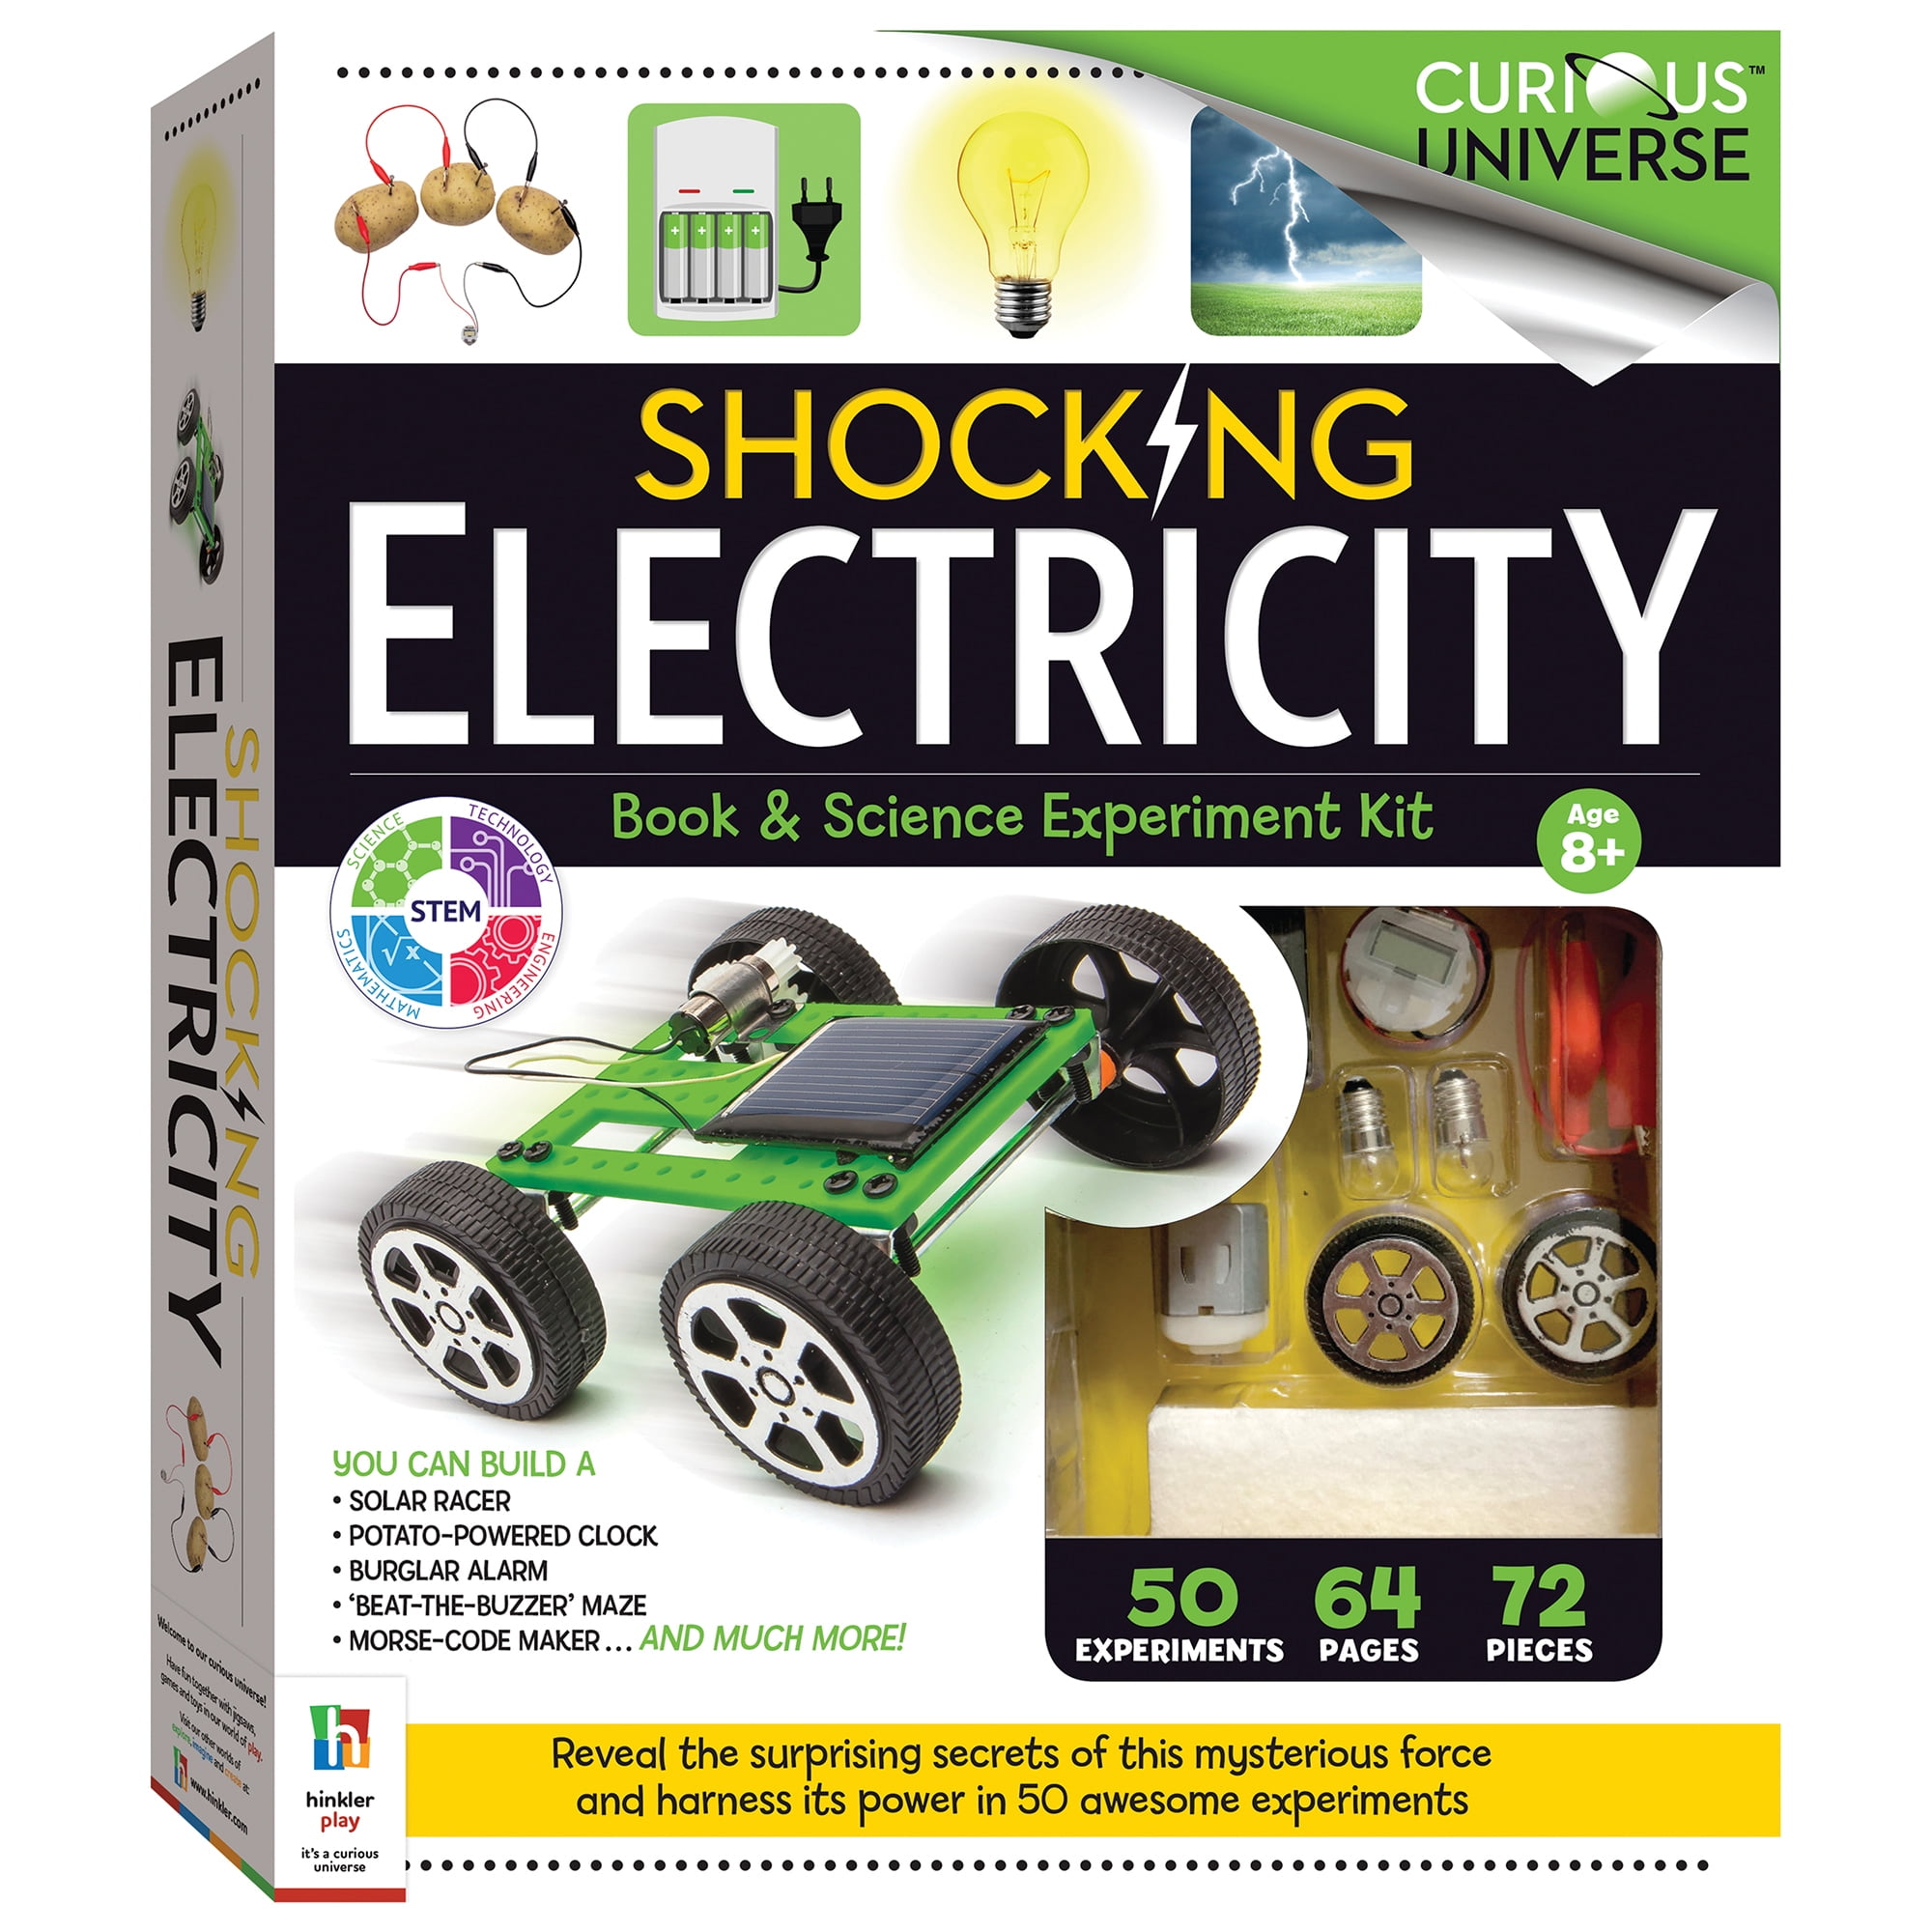 Curious Universe Kids: Discover Electricity - Book & Science Experiments Kit